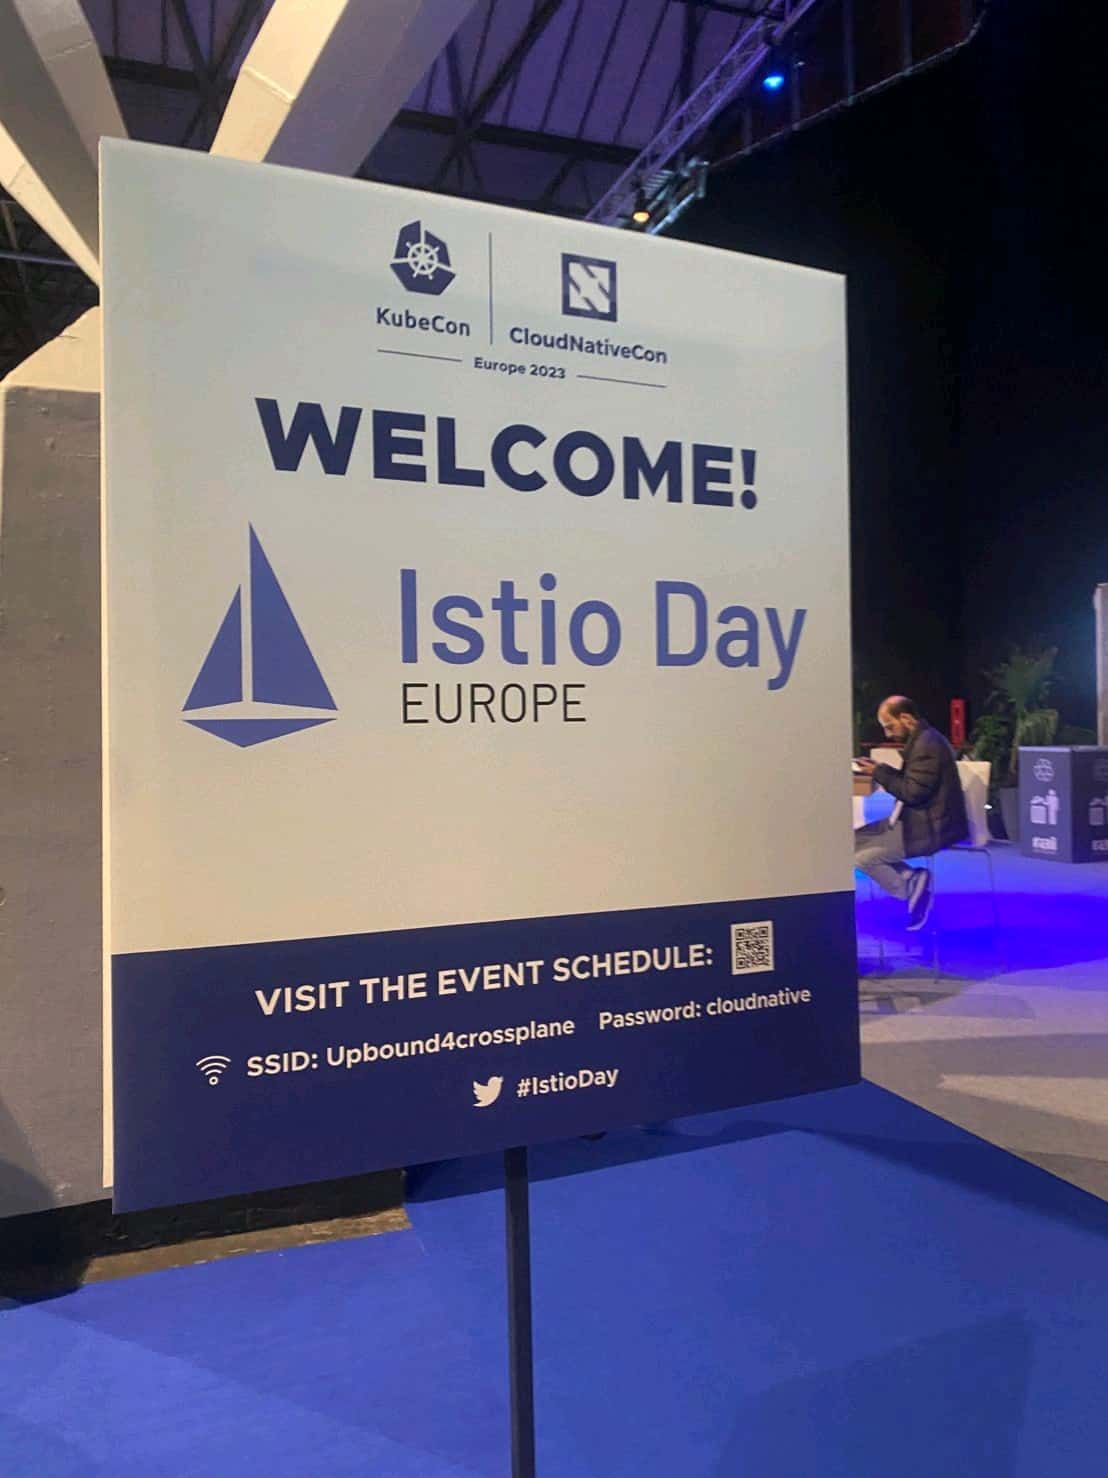 Istio Day Europe welcome banner